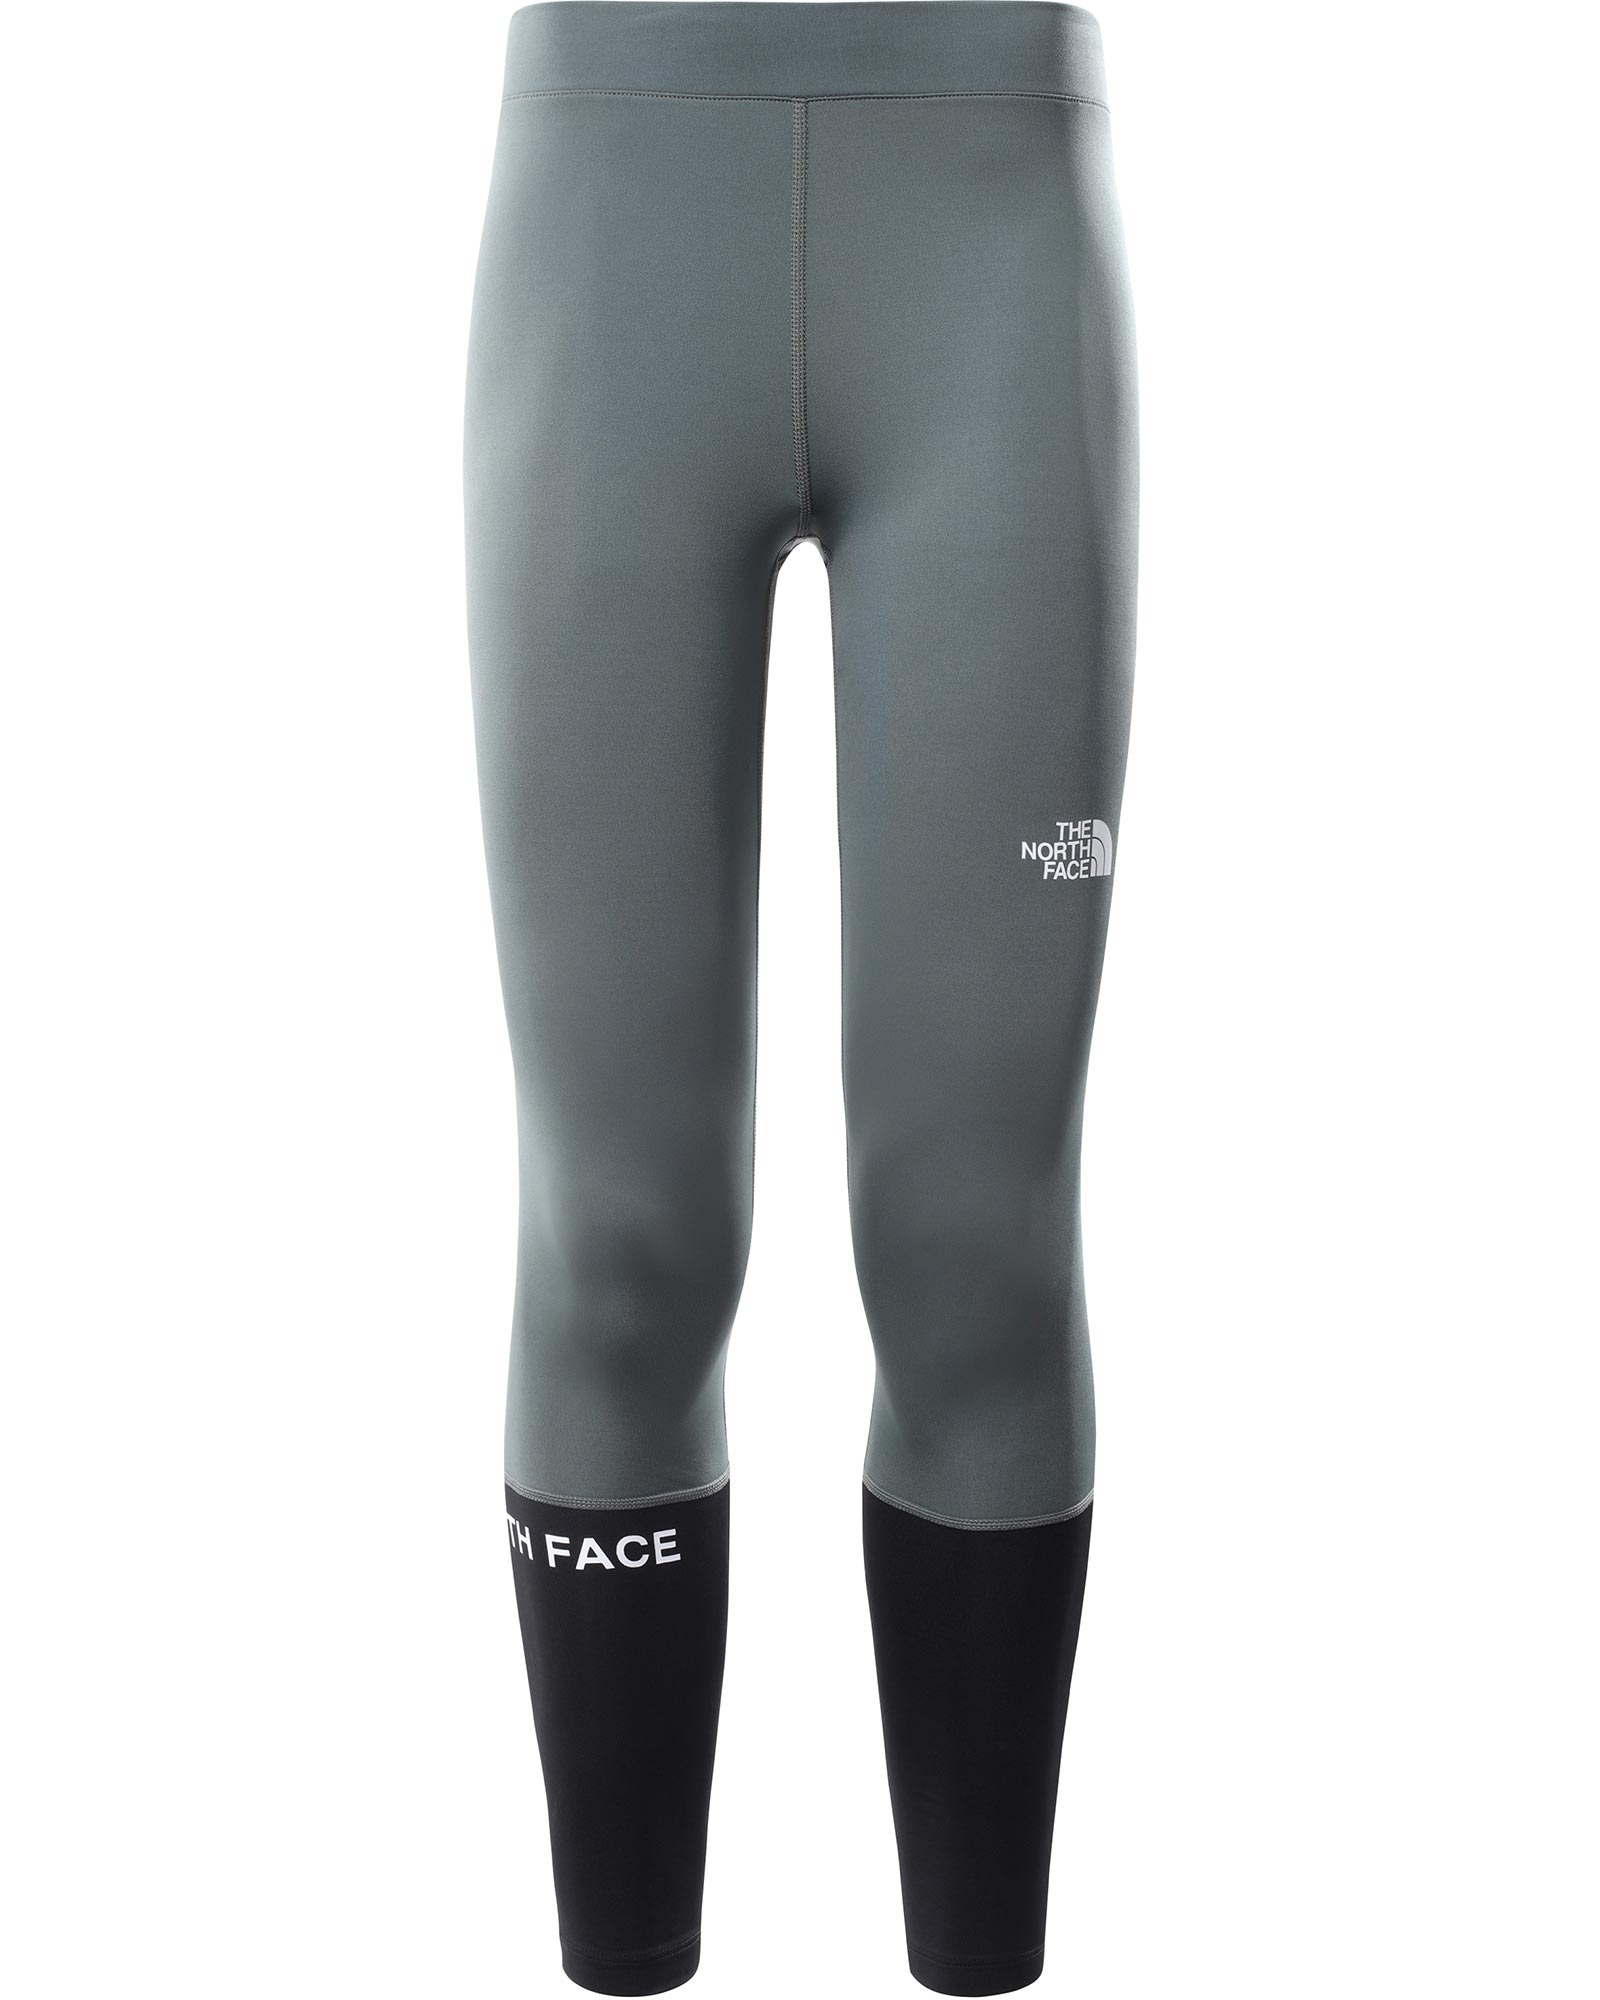 The North Face Mountain Athletics Women’s Tight - Balsam Green XS